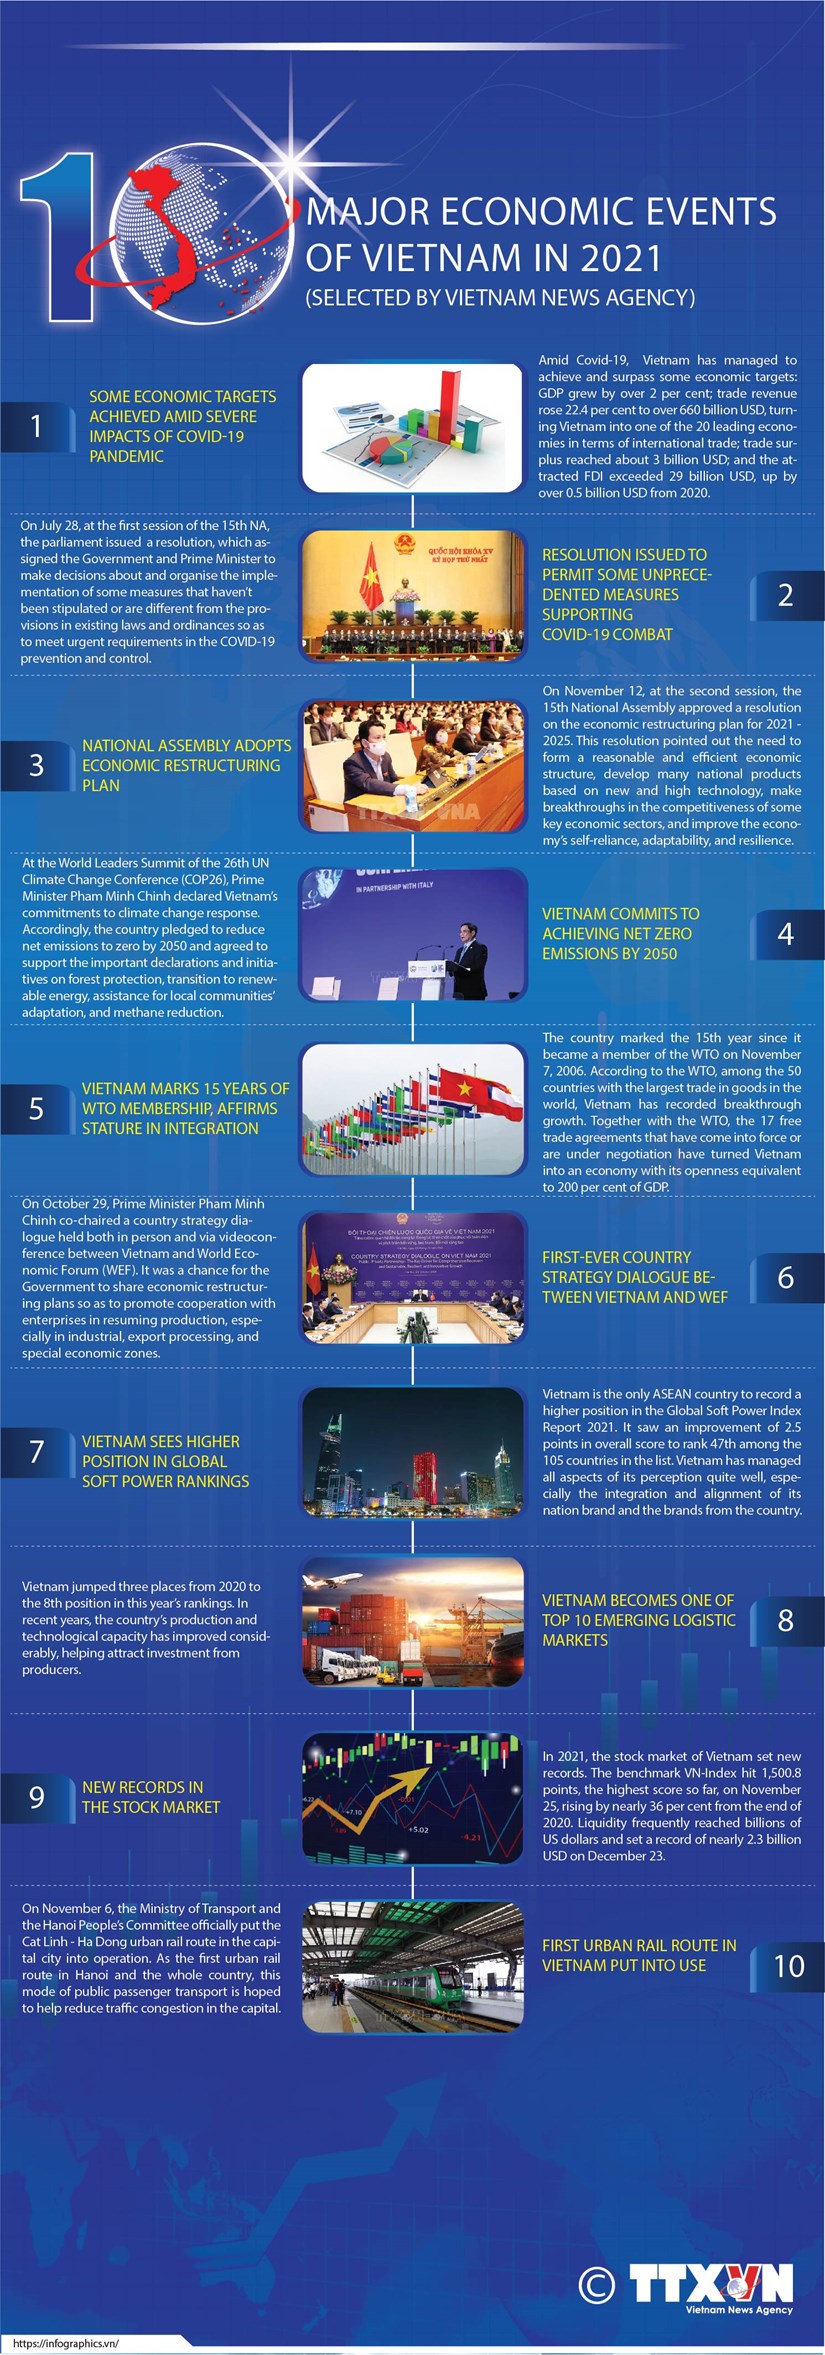 Top 10 economic events of Vietnam in 2021 hinh anh 1